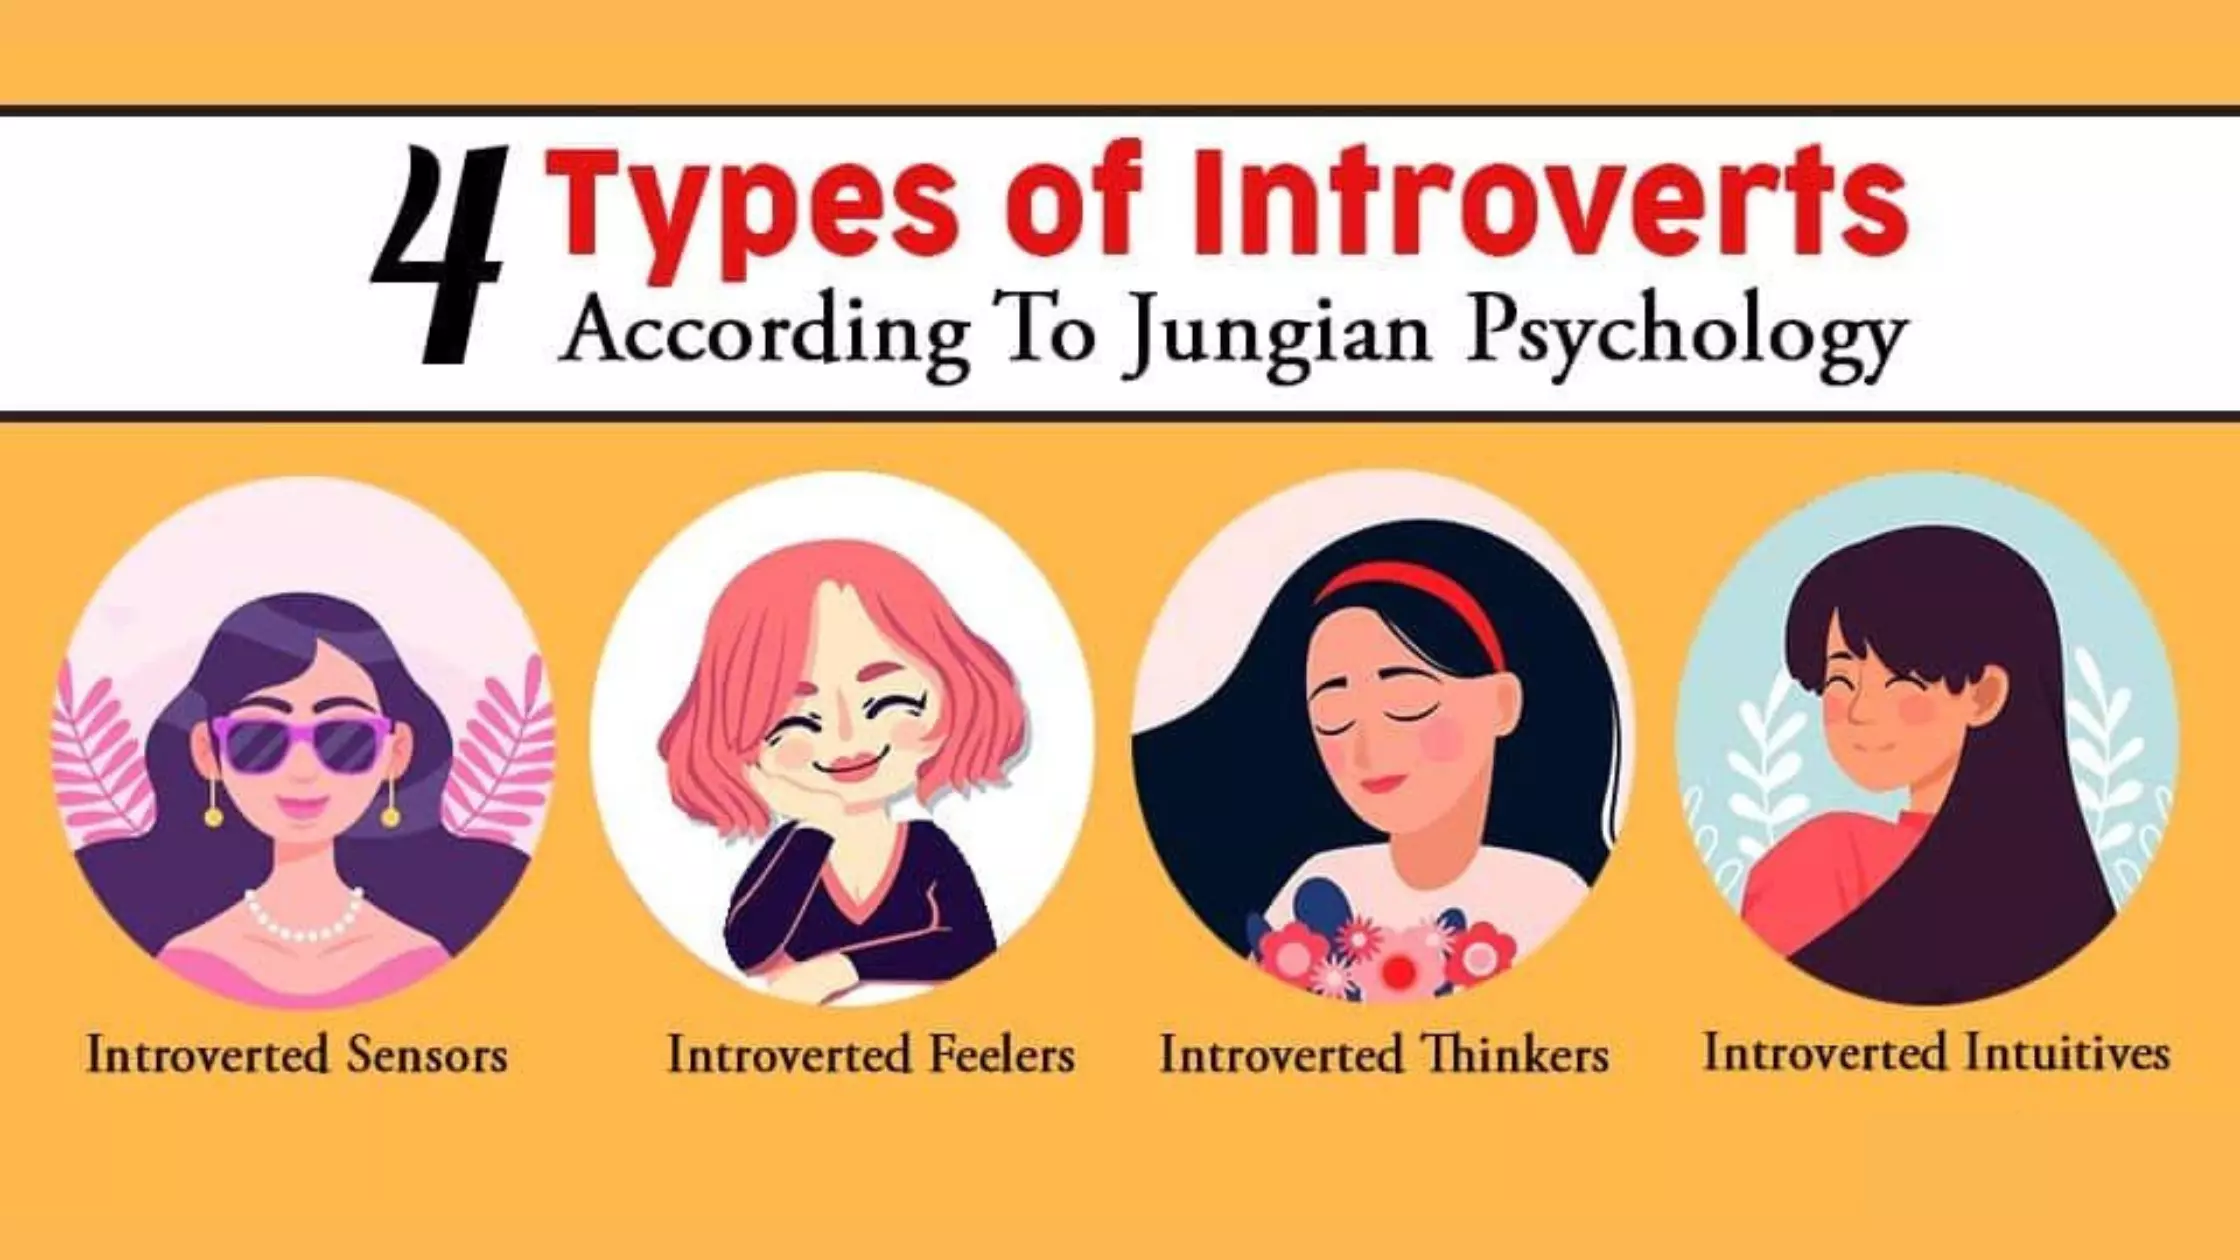 What are the 4 types of introverts